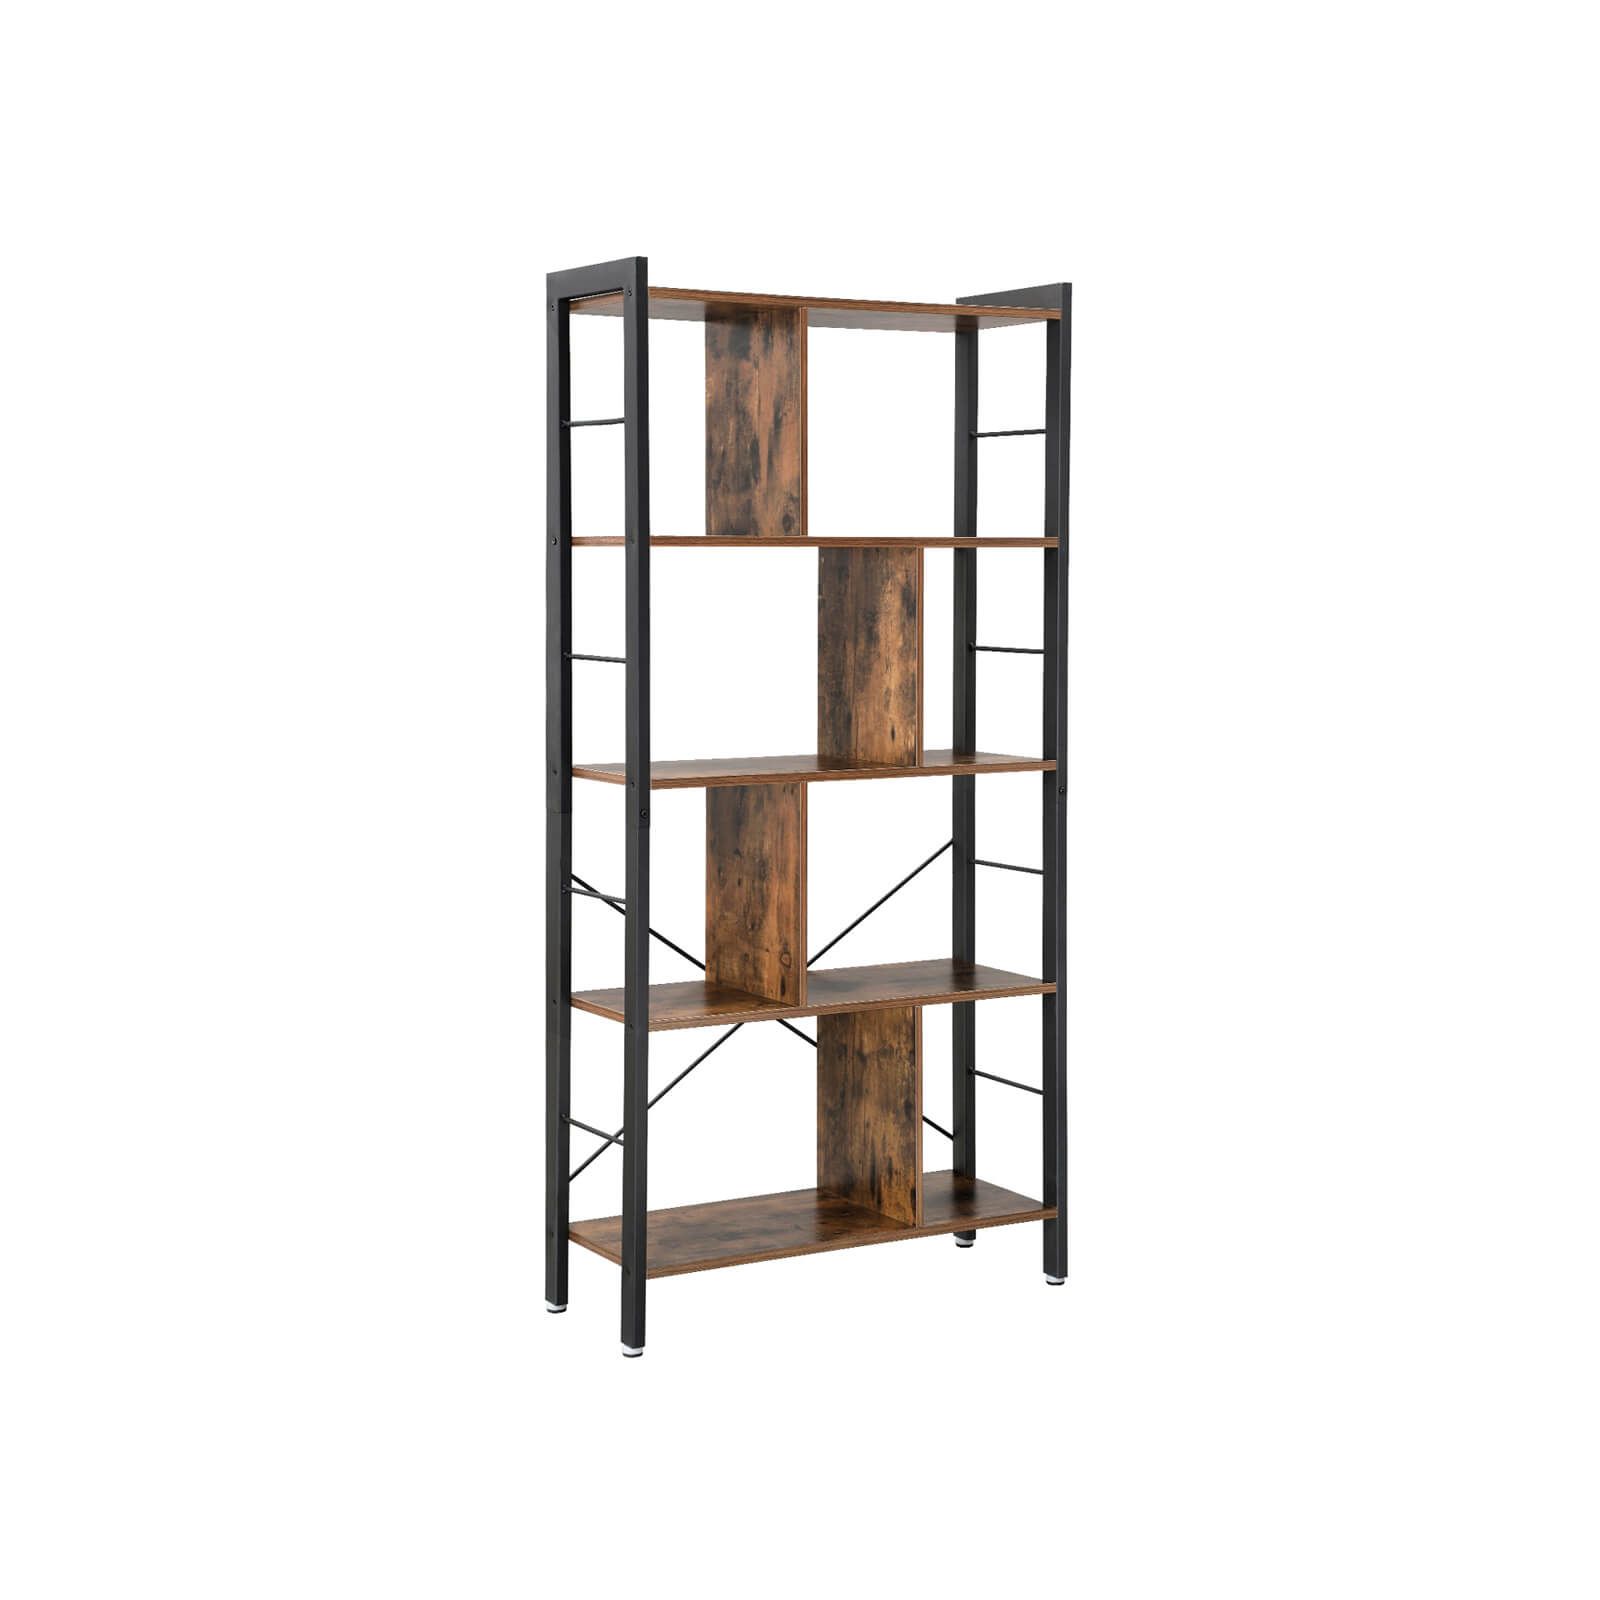 Industrial Style Bookshelf For Sale | Home Office Furniture | Vasagle Songmics Regarding Four Tier Bookcases (View 7 of 15)